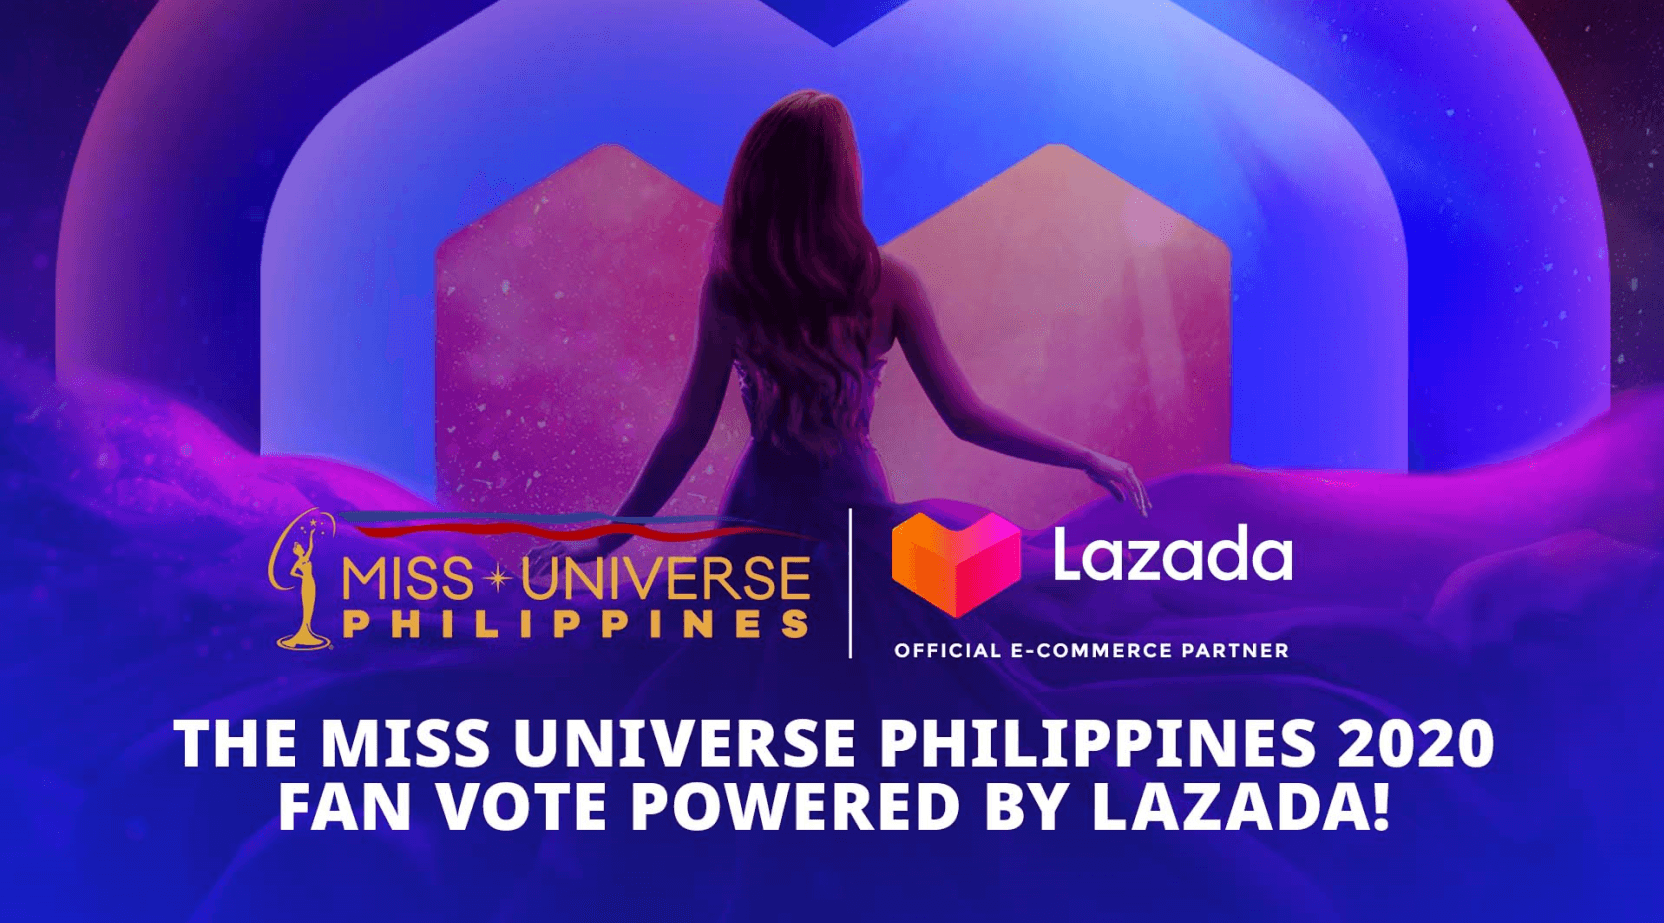 Voting for your fave Miss Universe PH candidate can send her to the Top 16